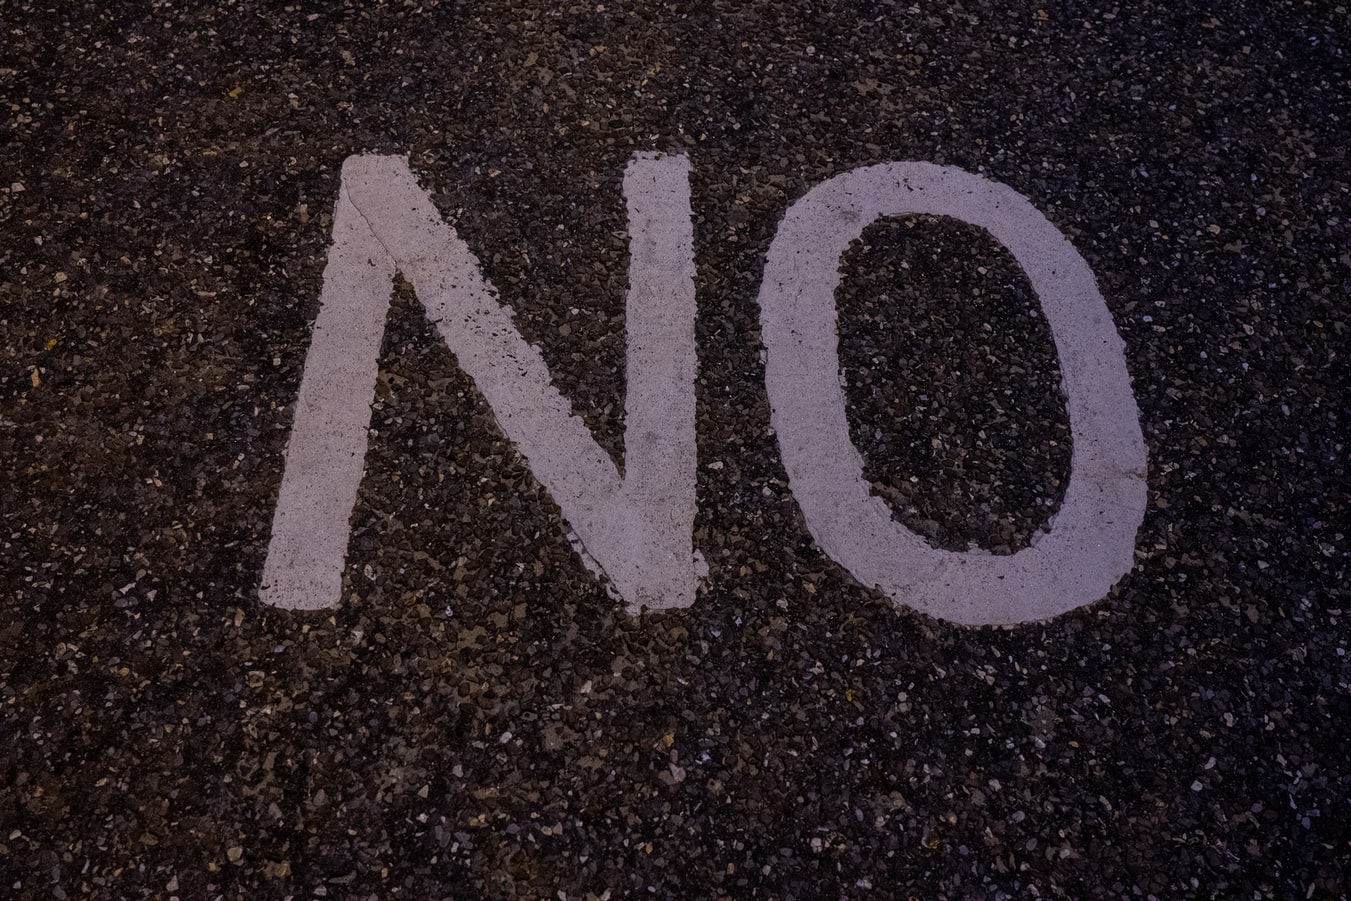 The phrase No painted on the sidewalk